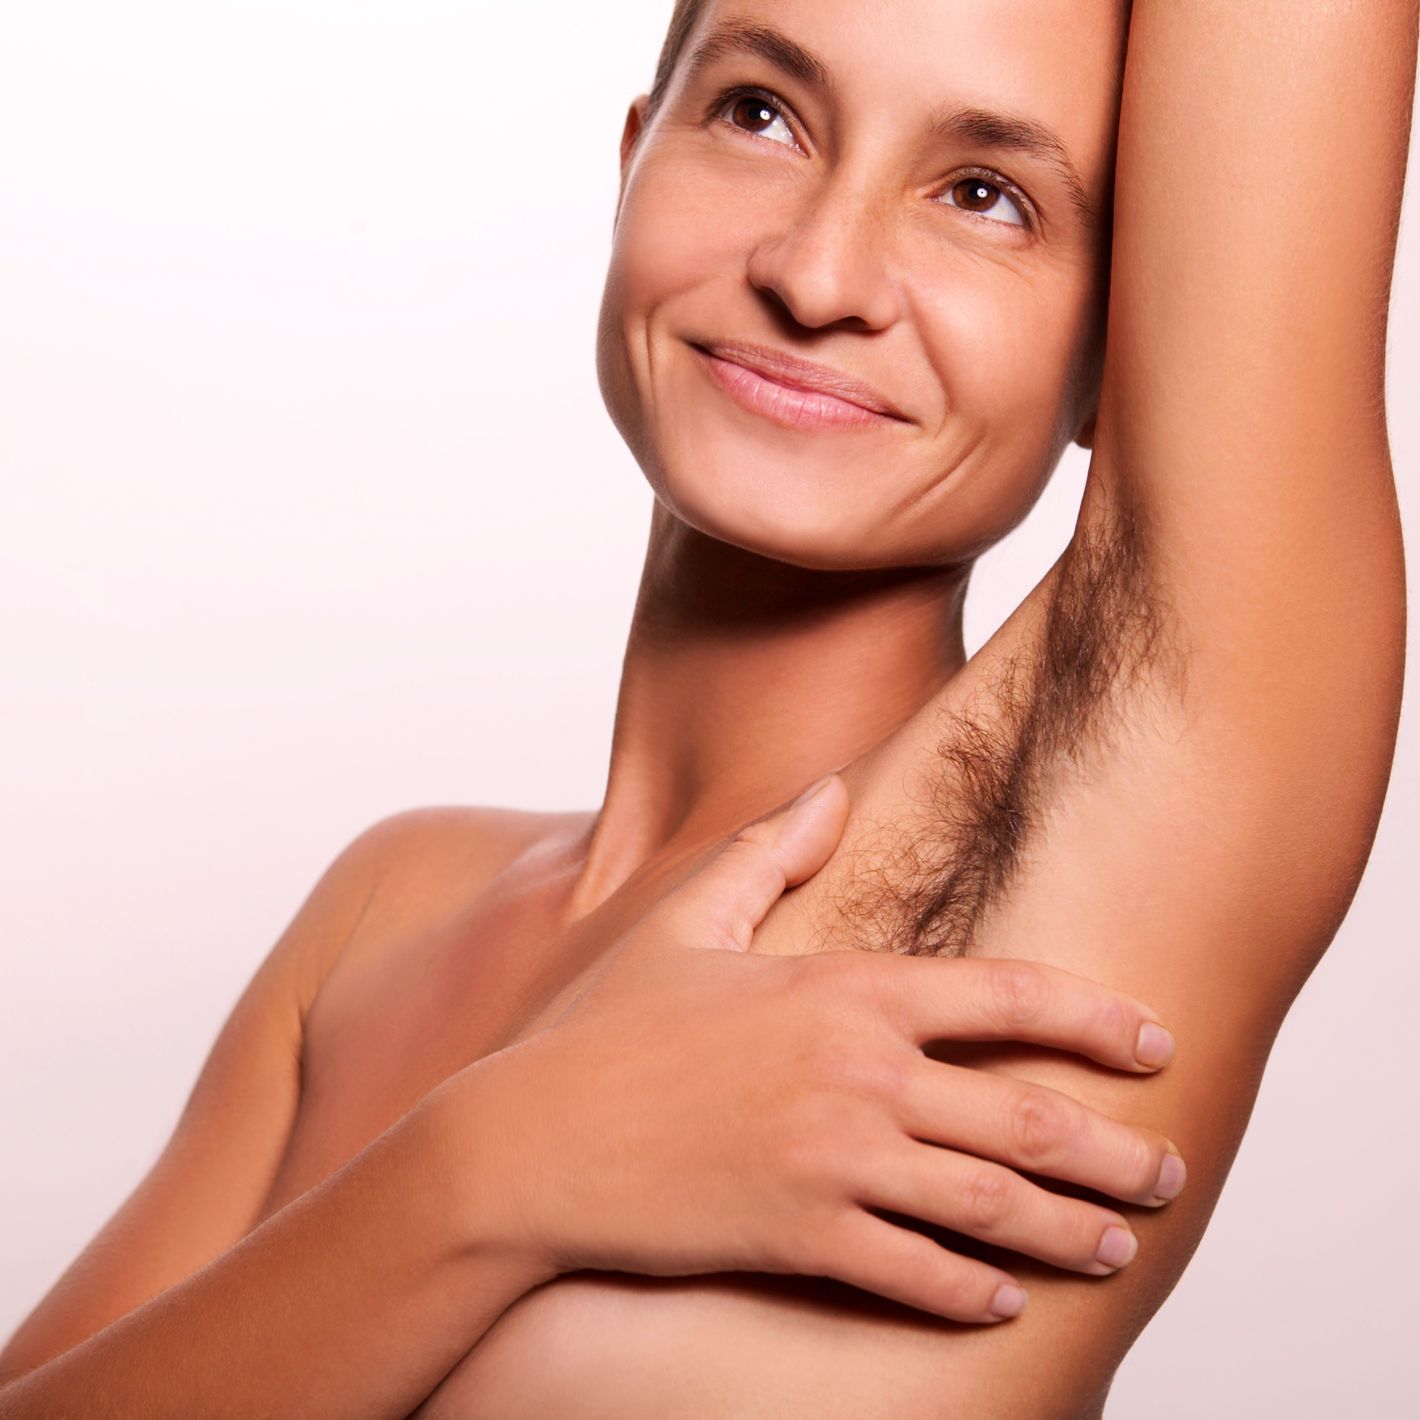 And Now, We Answer Every Armpit-Hair Question